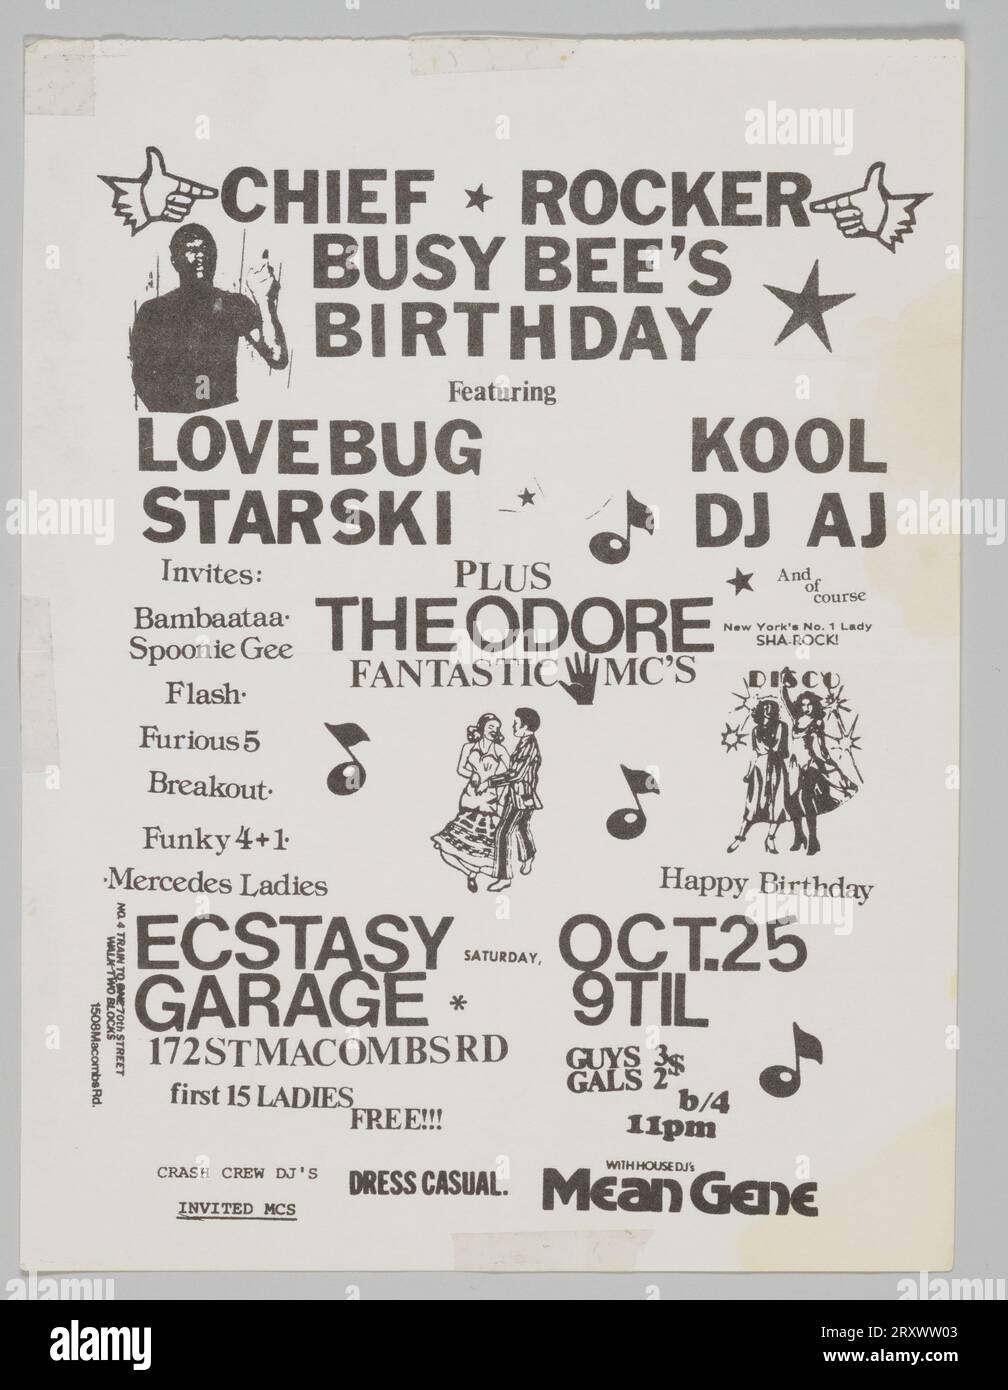 Flier for “Chief Rocker Busy Bee’s Birthday” October 25, 1980 Stock Photo